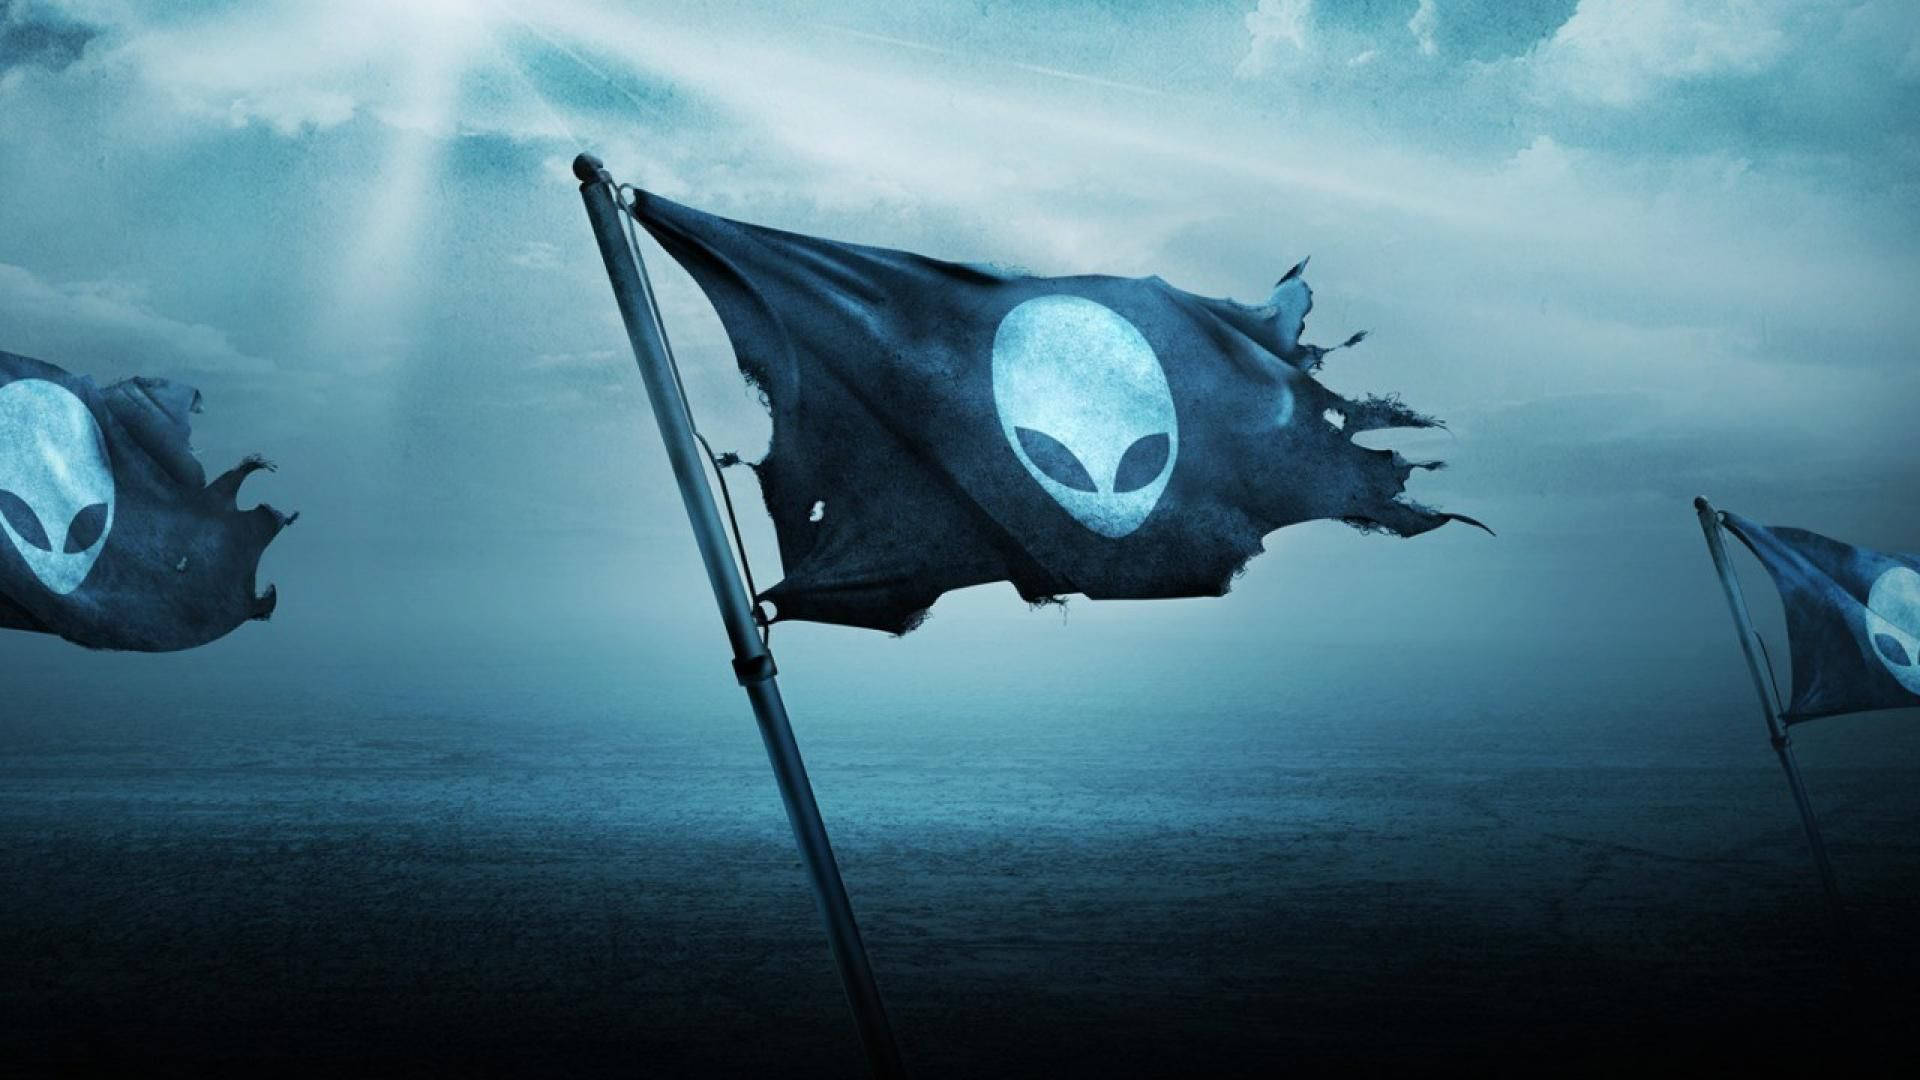 Show your pride in gaming with this Alienware Flag Wallpaper